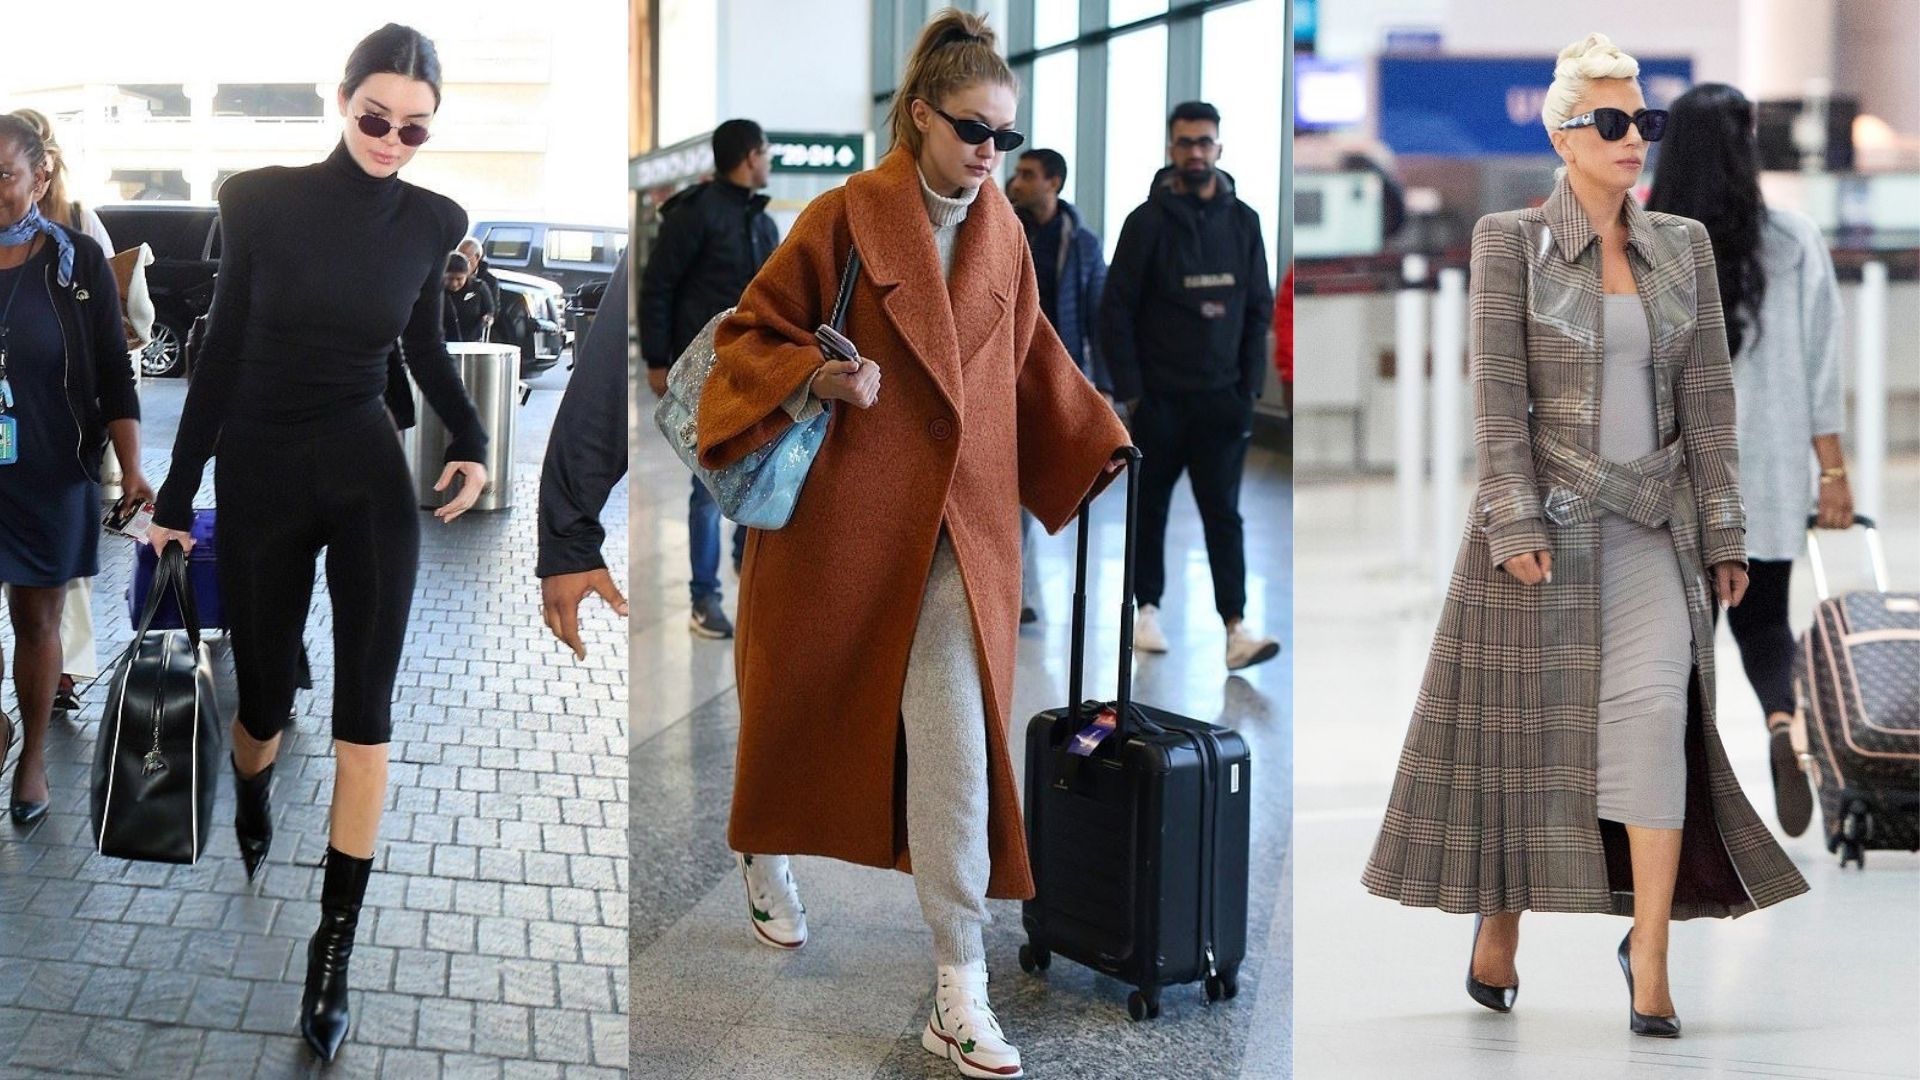 5 Fashion Experts Share Their Go-To Airport Outfits